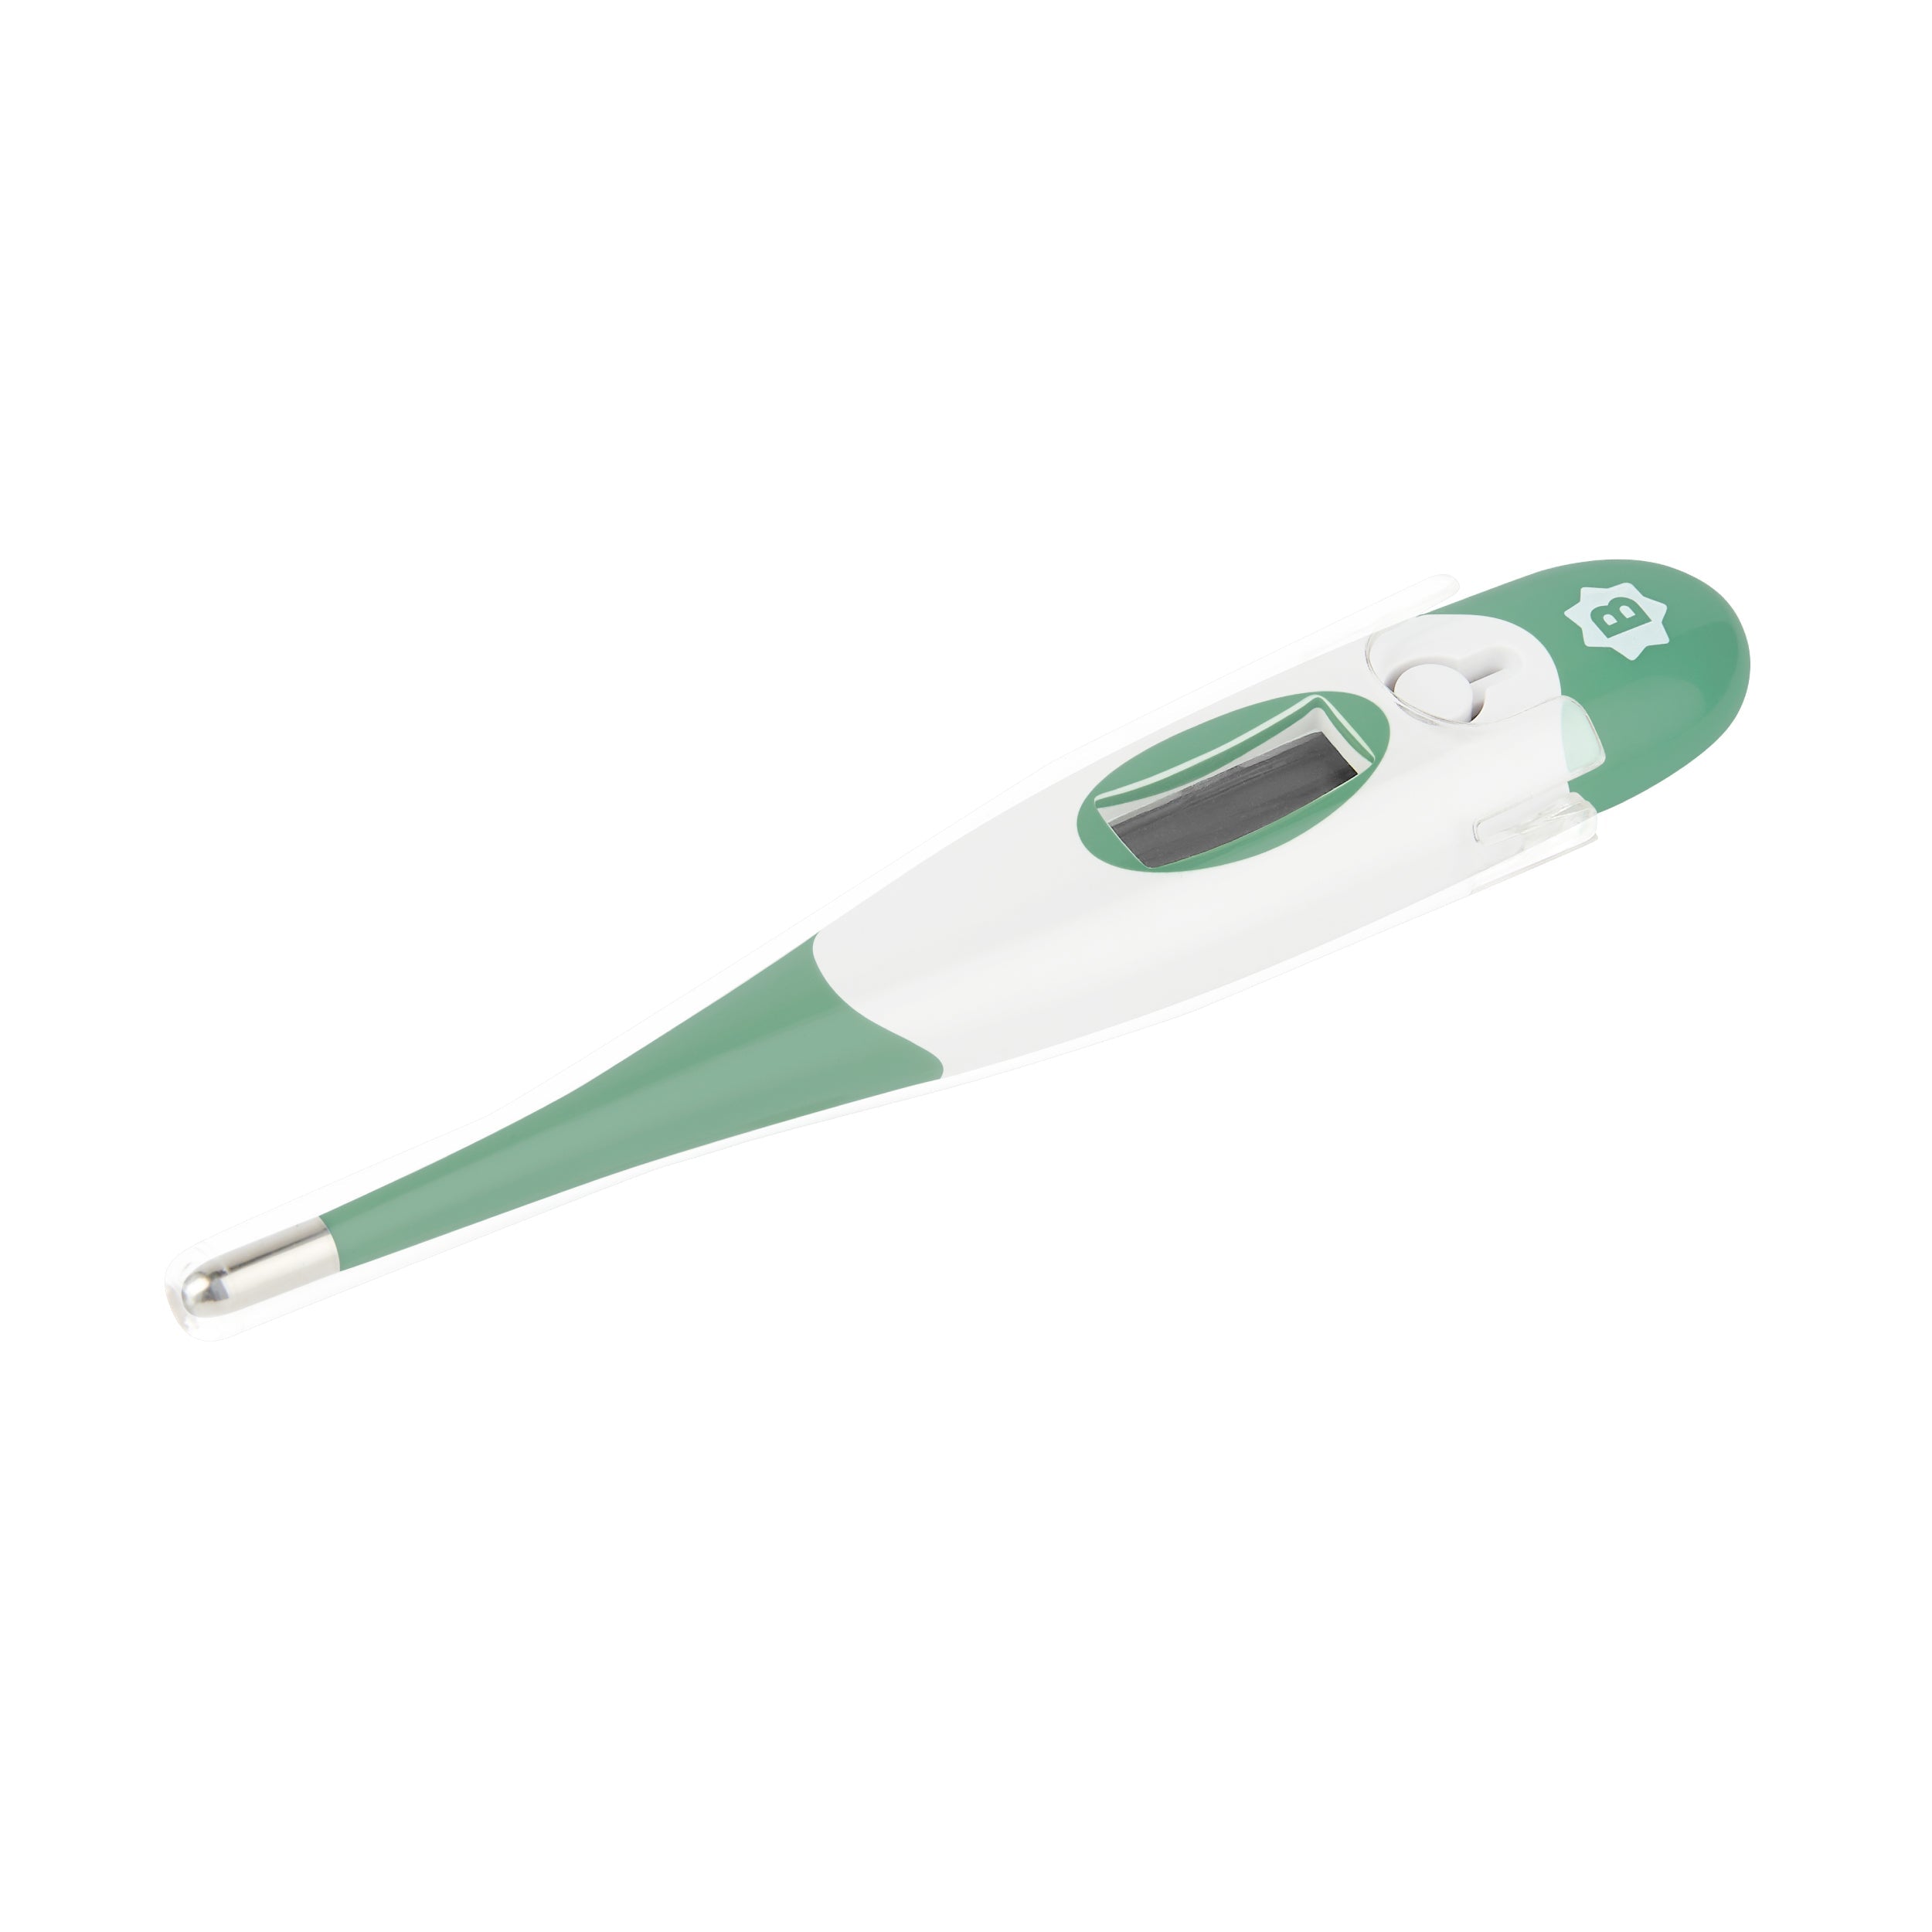 Ultrasnelle thermometer